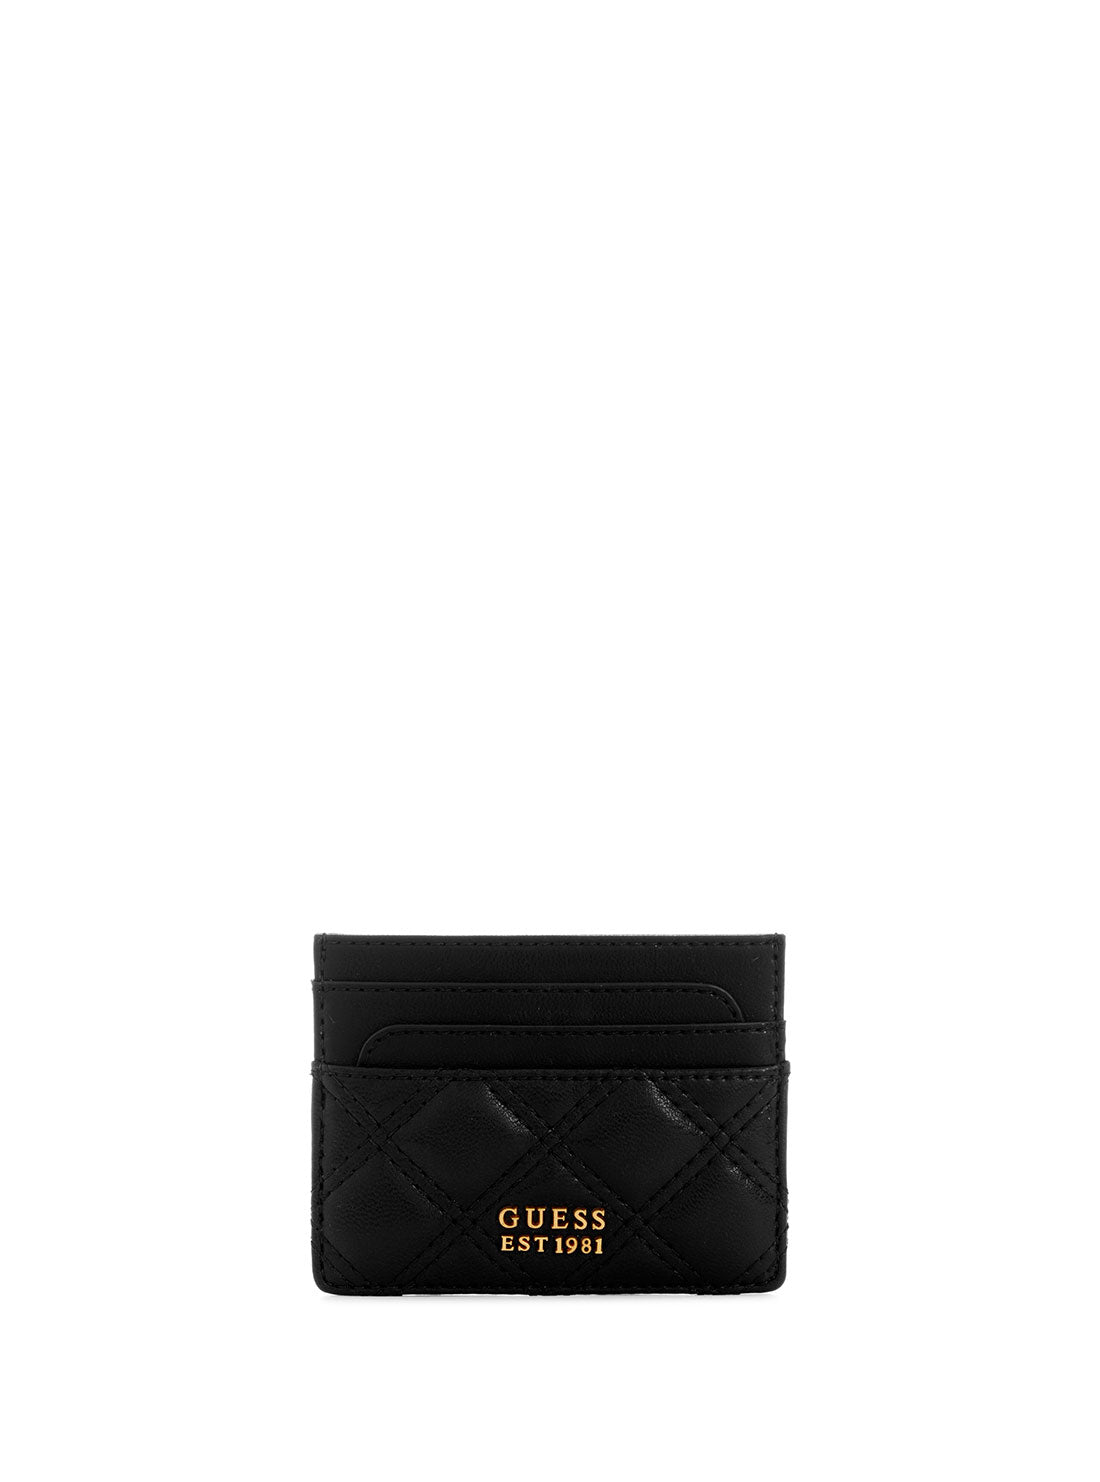 GUESS Women's Black Giully Card Holder QA874835 Front View